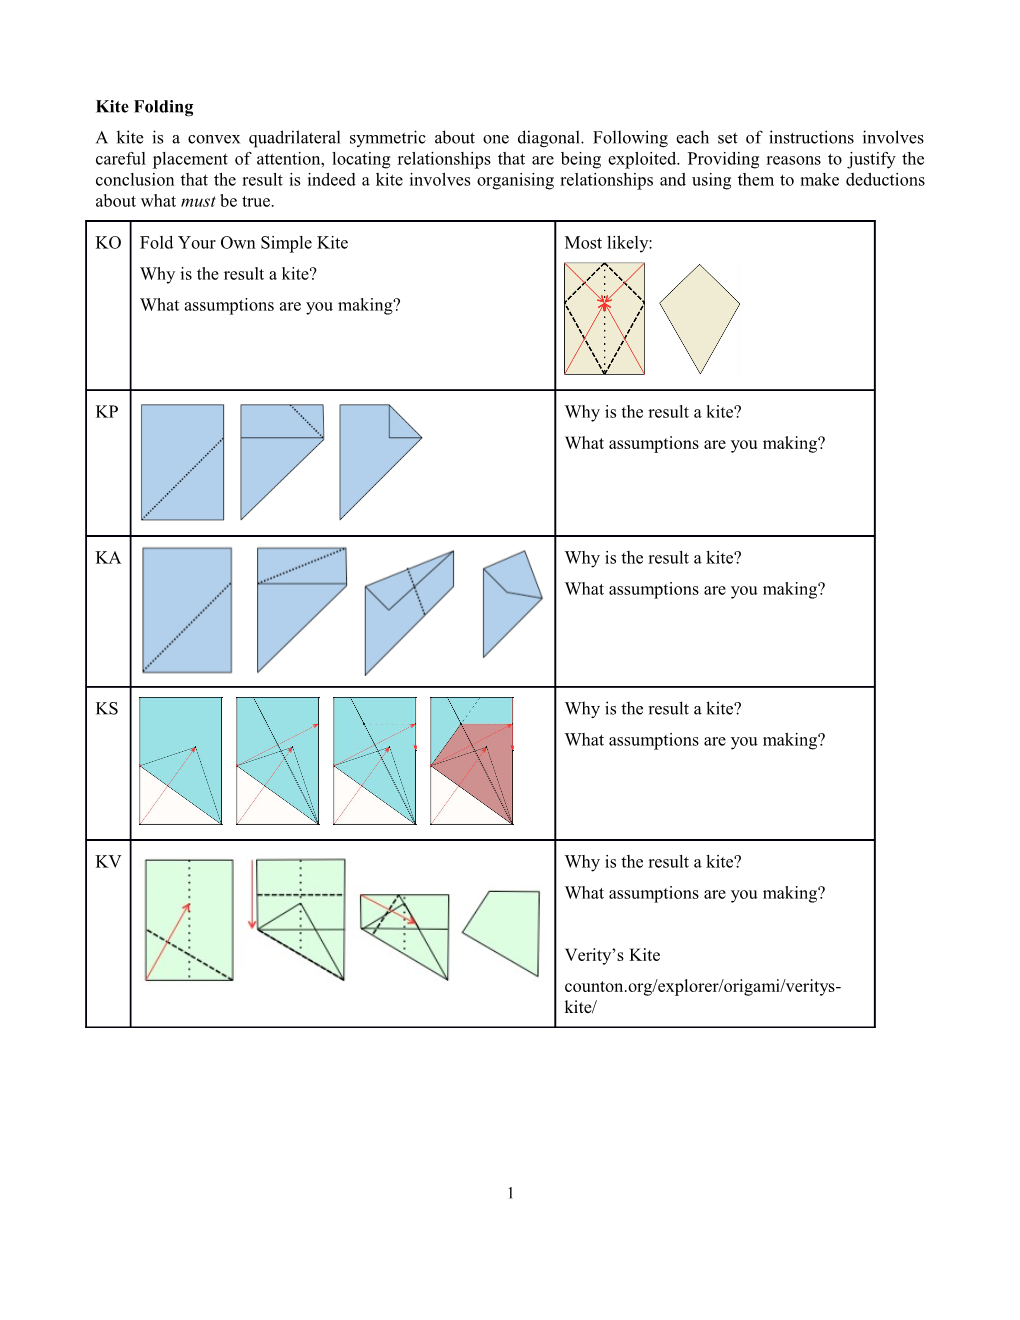 A Kite Is a Convex Quadrilateral Symmetric About One Diagonal. Following Each Set Of